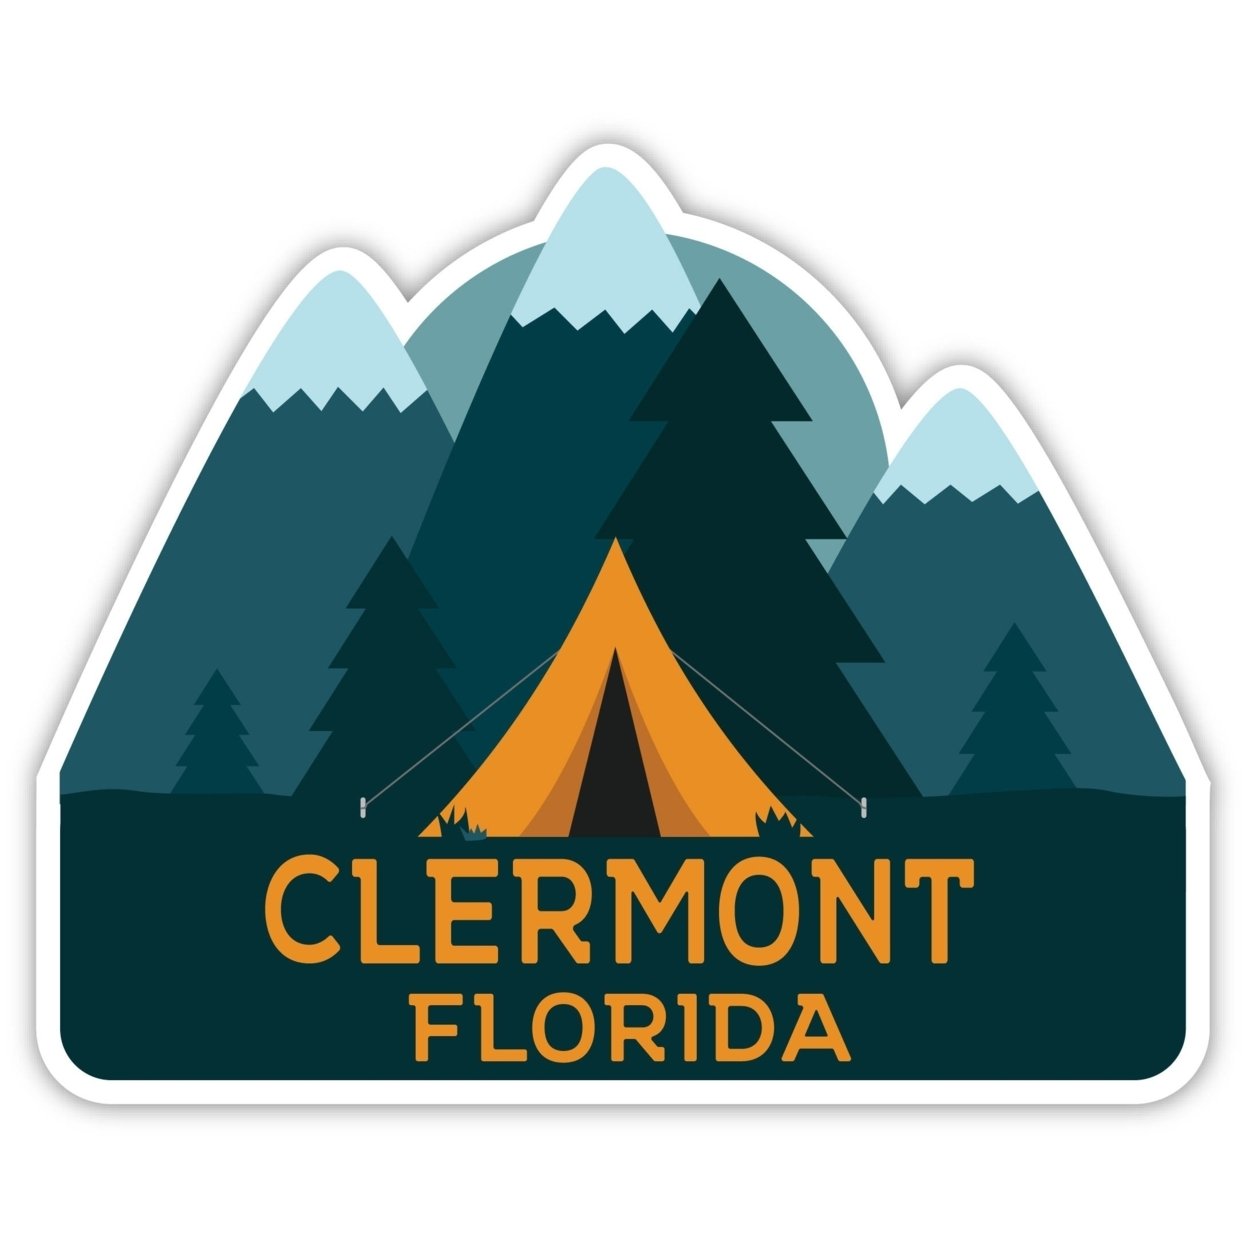 Clermont Florida Souvenir Decorative Stickers (Choose Theme And Size) - 4-Pack, 6-Inch, Tent